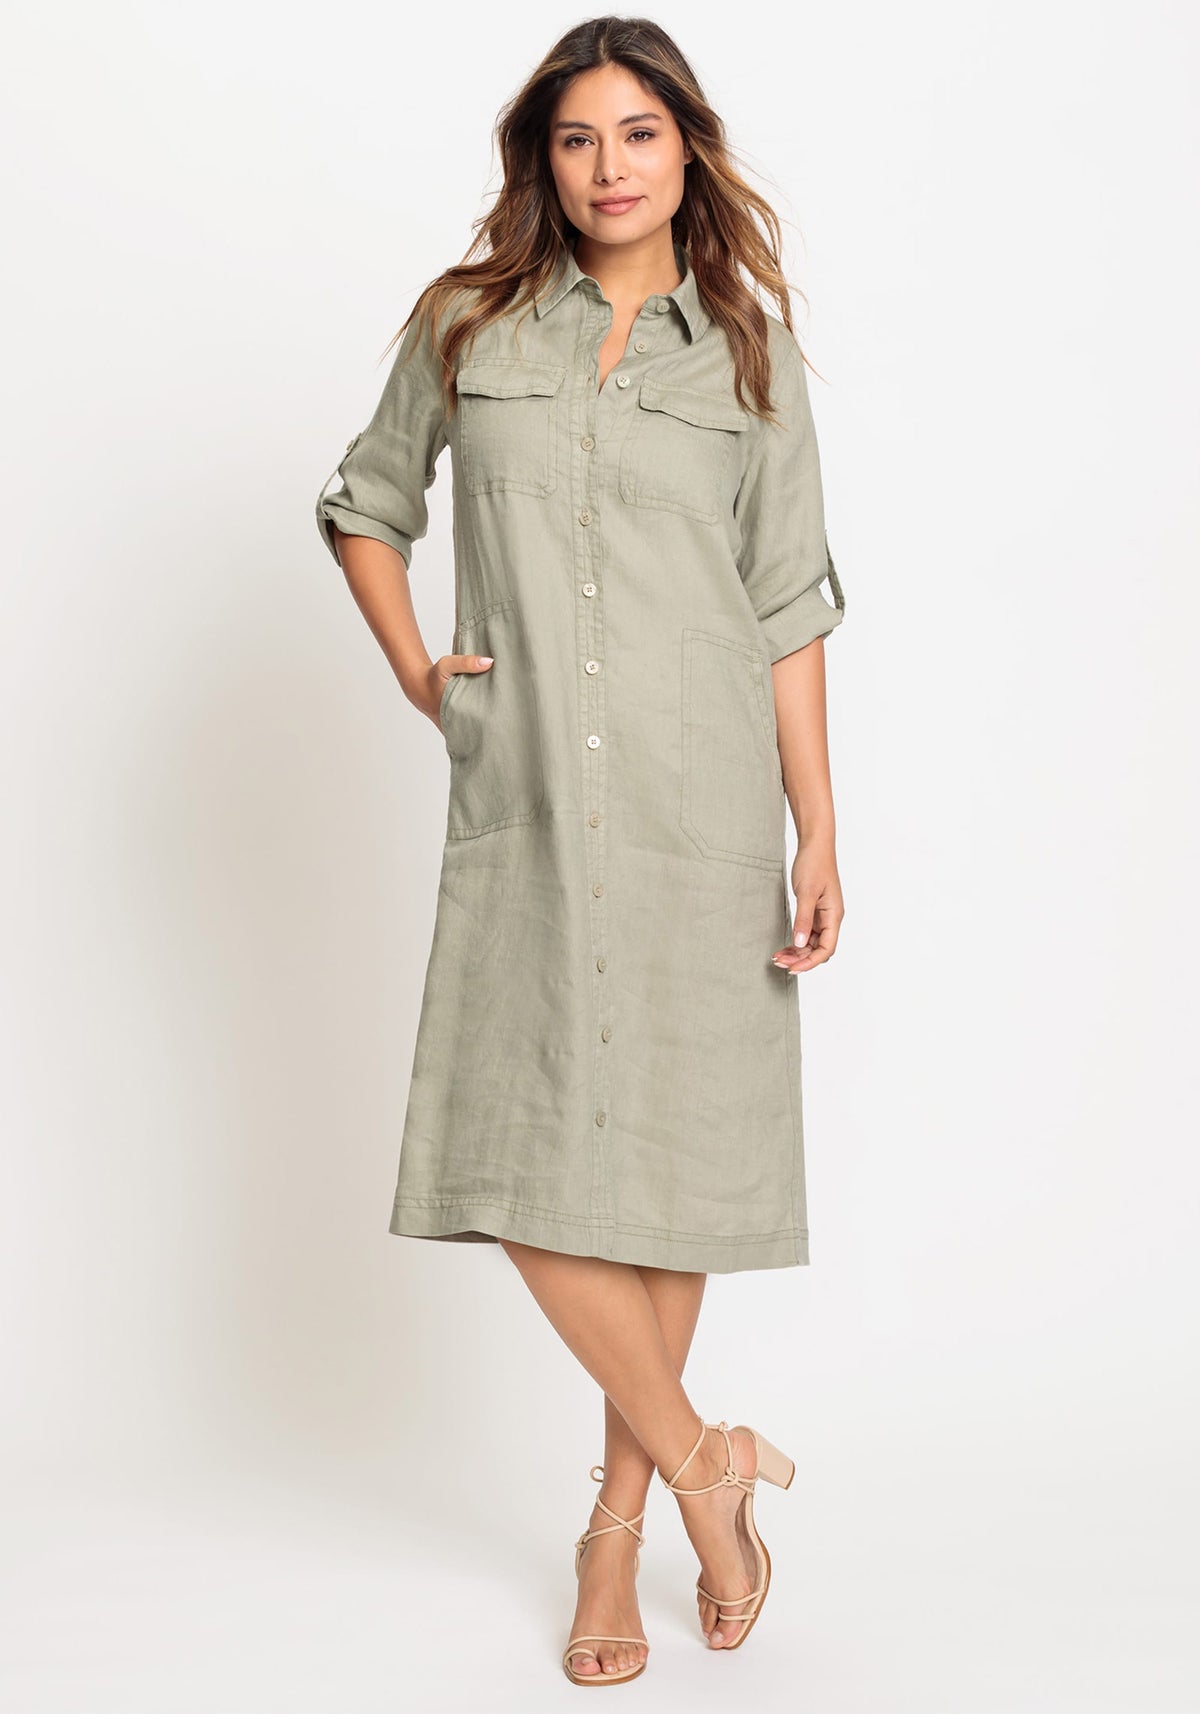 100% Linen 3/4 Sleeve Dress with Rolled Sleeve Tab Detail